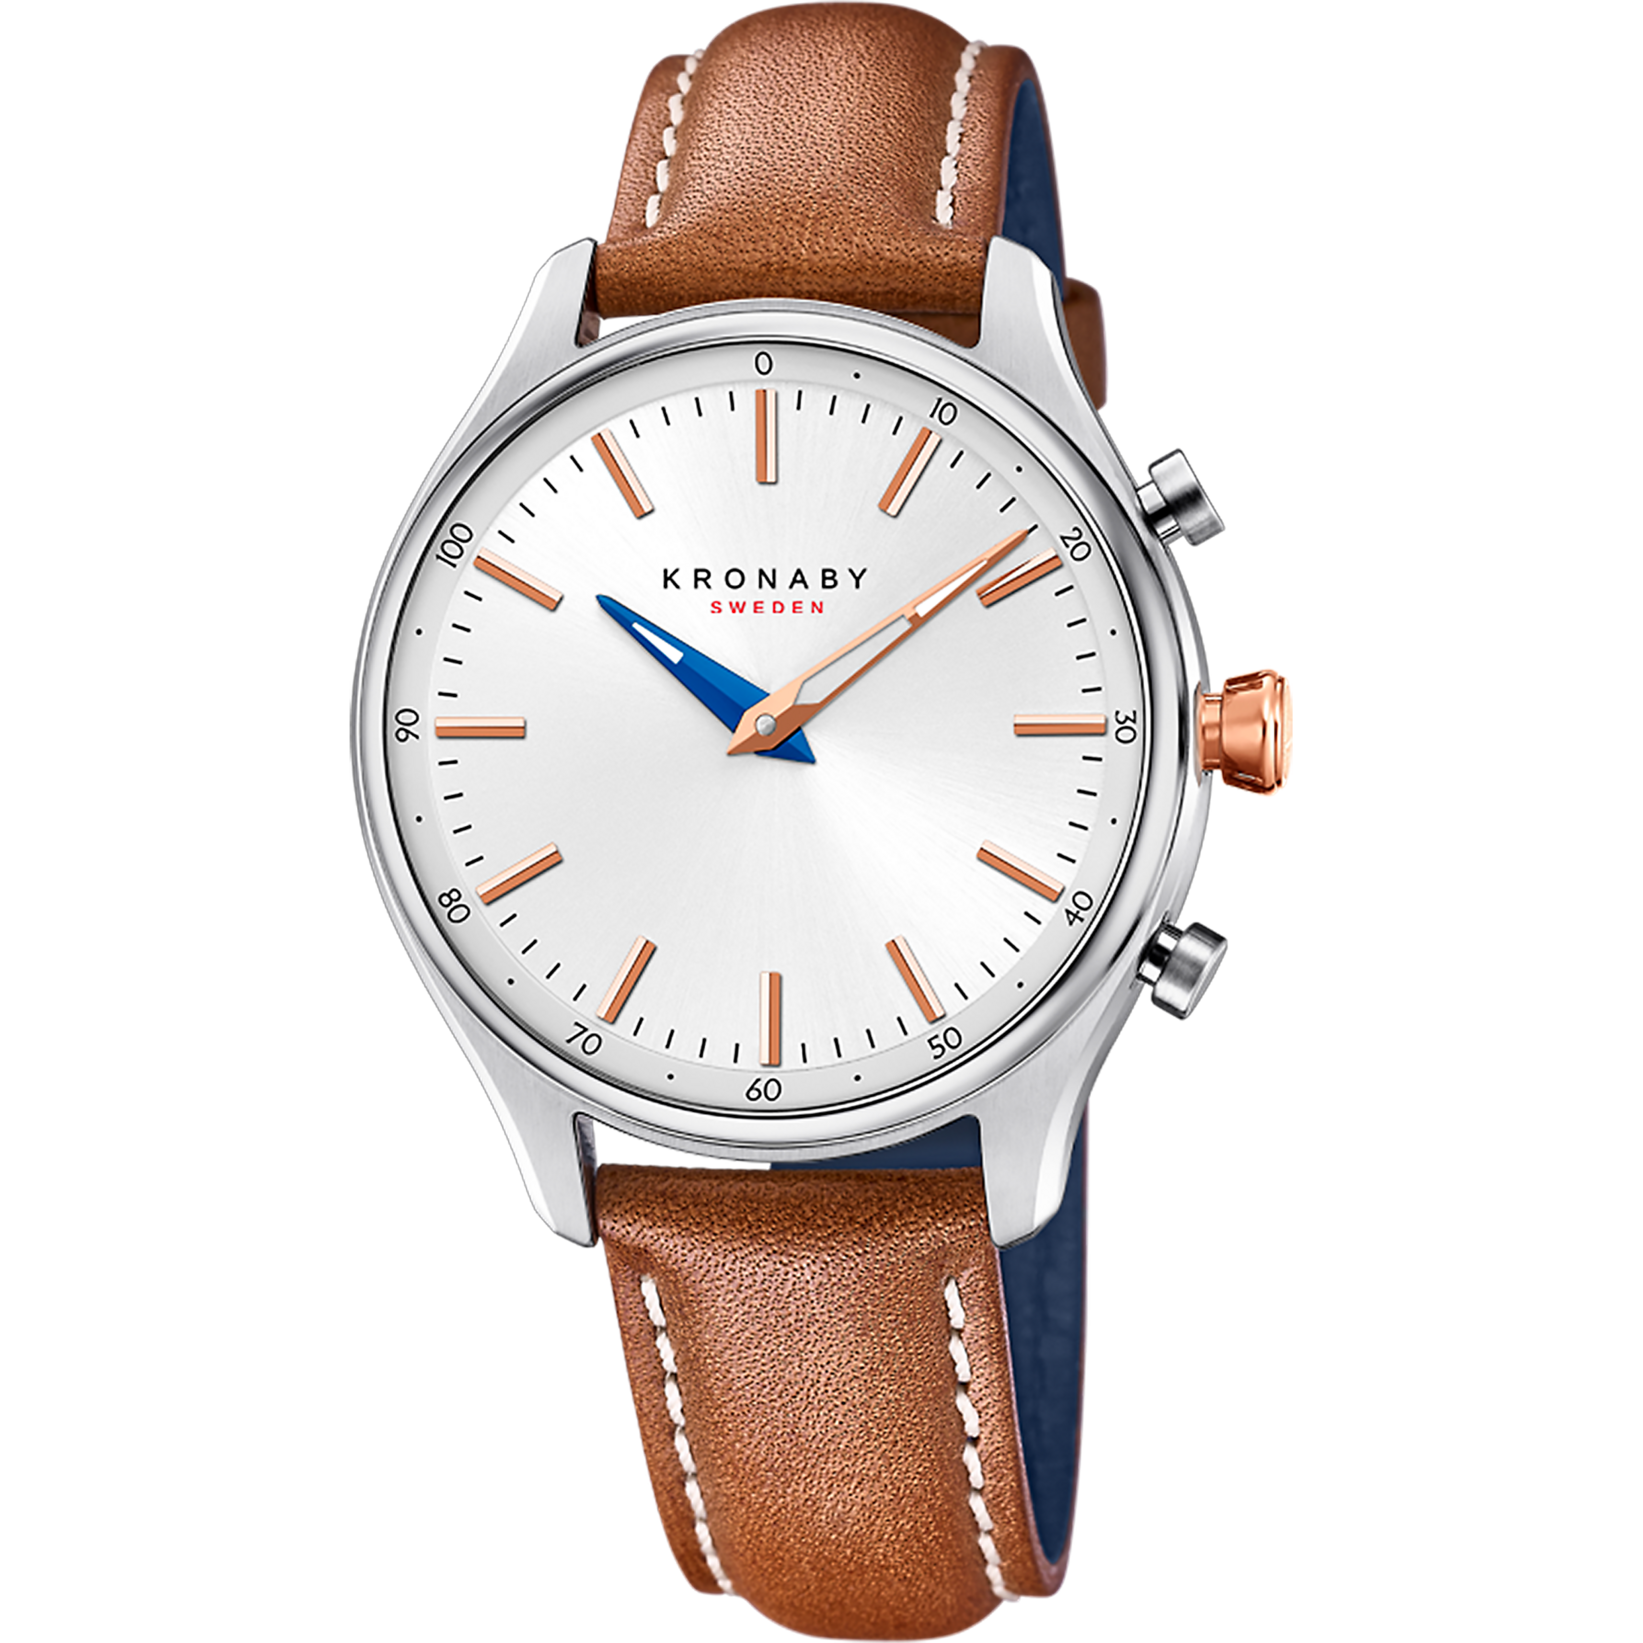 Kronaby Sekel S3783-1 - Leather - Strap Color: Brown - Strap Size: 18 mm - Case Size: 38 mm